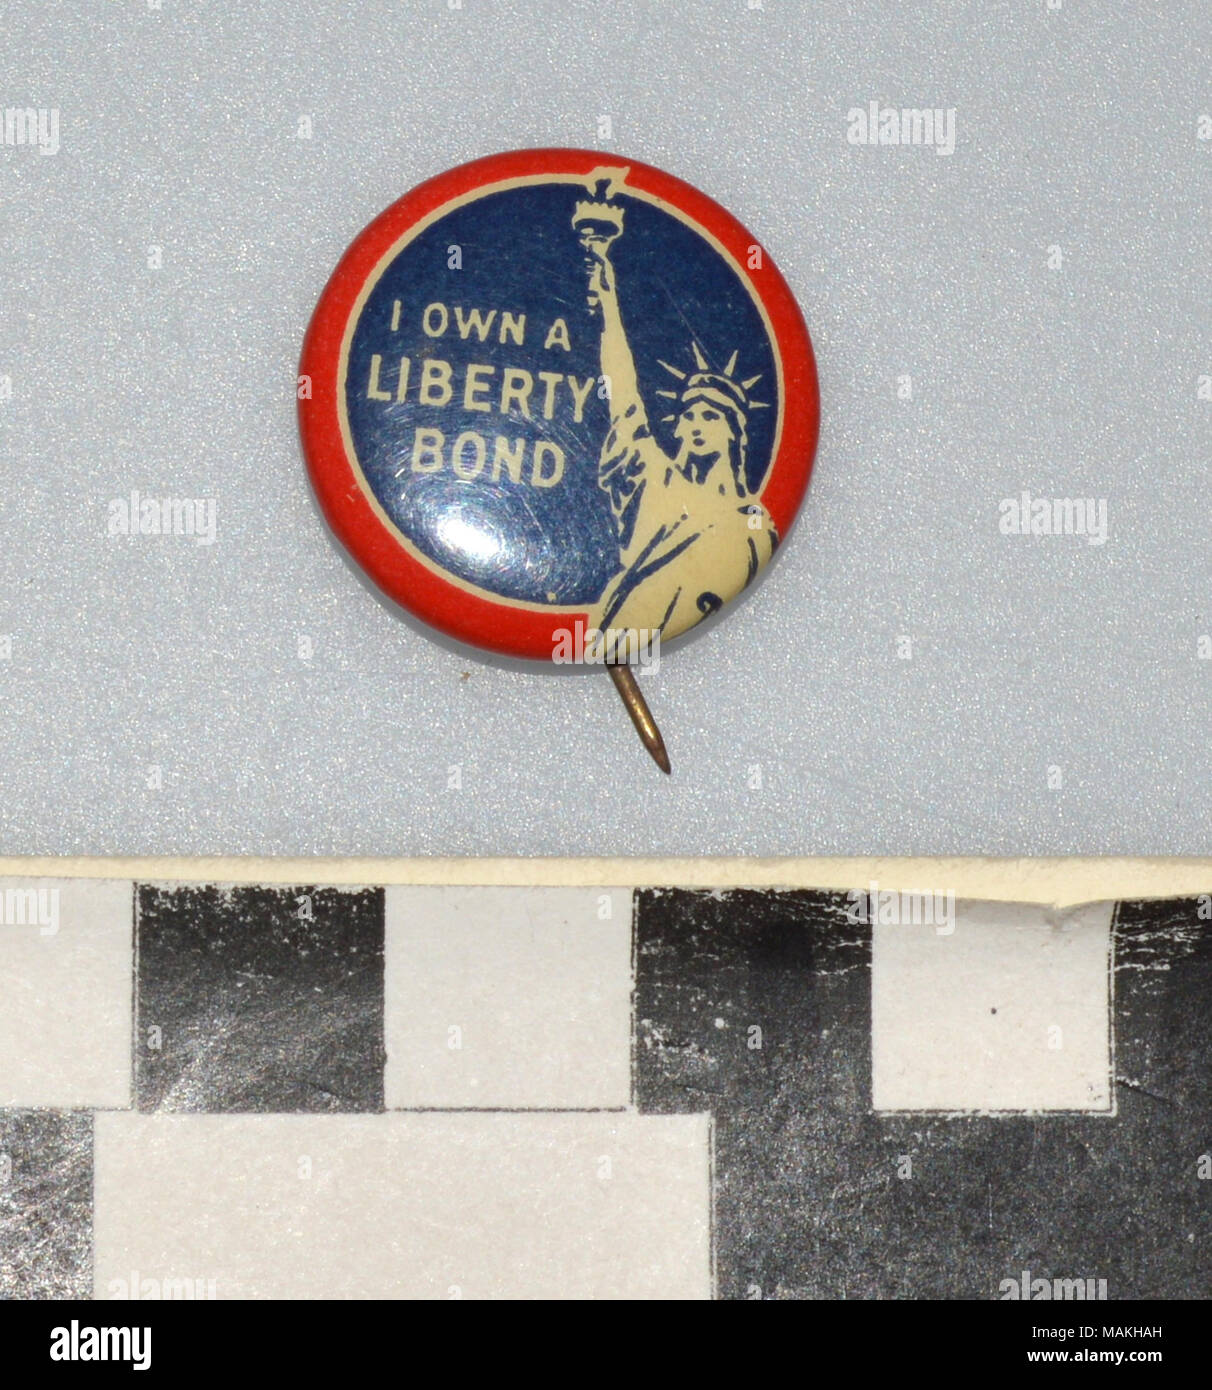 World War I Liberty Loan pin, round blue pin with red border features the words 'I Own A Liberty Bond' and an image of the Statue of Liberty. Given to someone who purchased a Liberty Loan or volunteered or supported the effort. Title: World War I Liberty Bond Pin  . between 1916 and 1919. Stock Photo